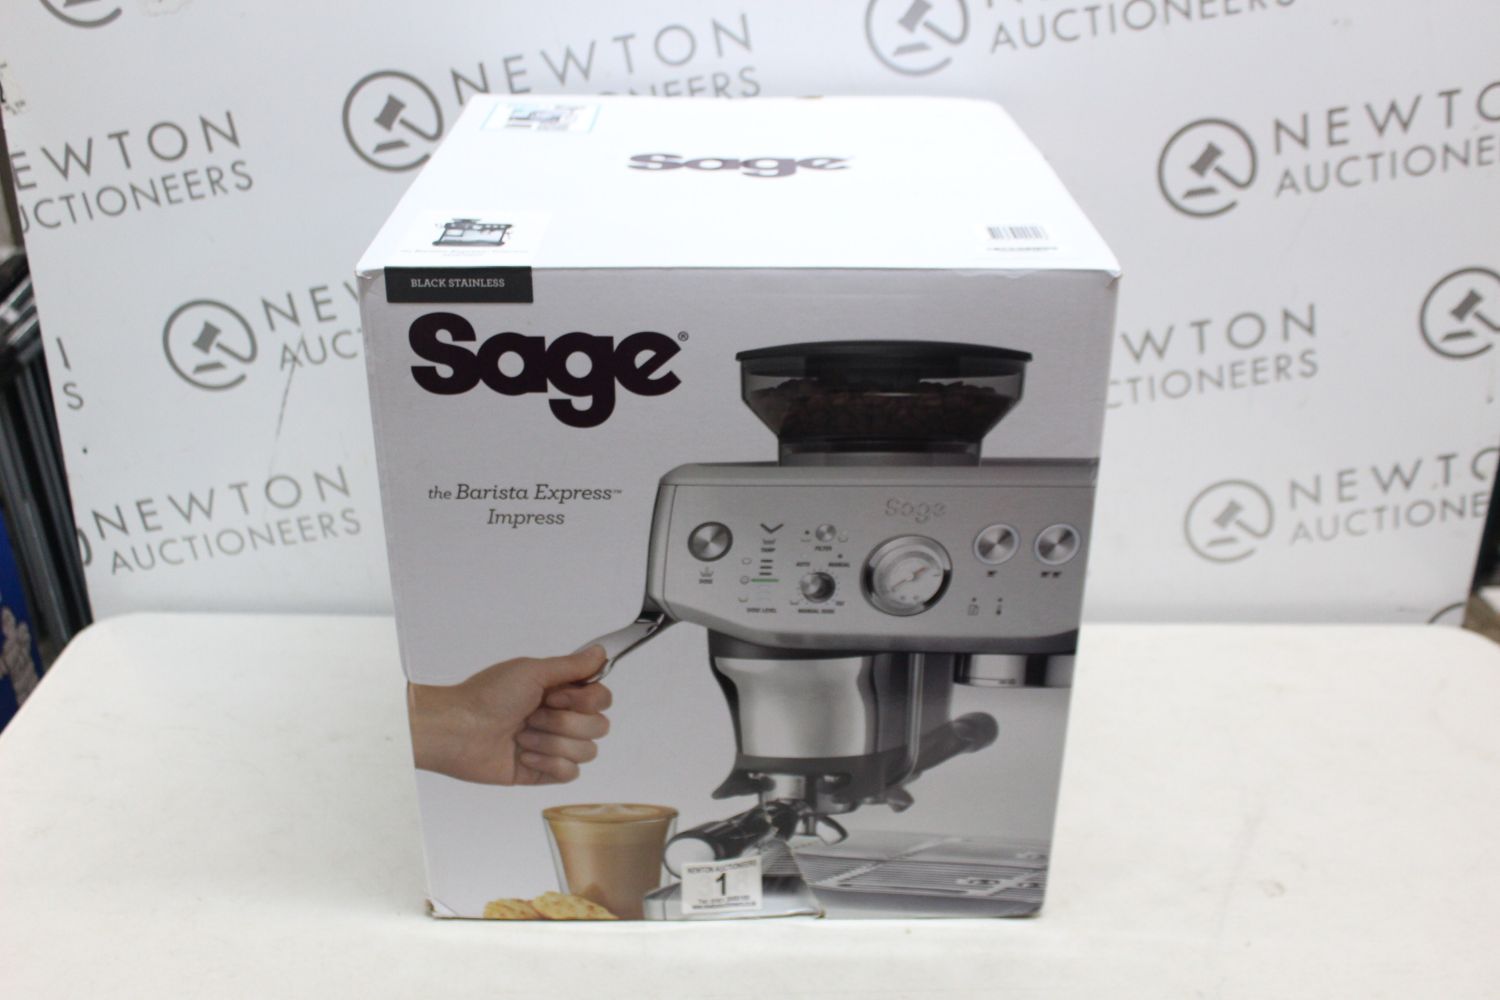 Online TIMED General Auction: Including Coffee Machines, Kitchen Appliances, Everyday Goods, Laptops, Appliances, Toys etc